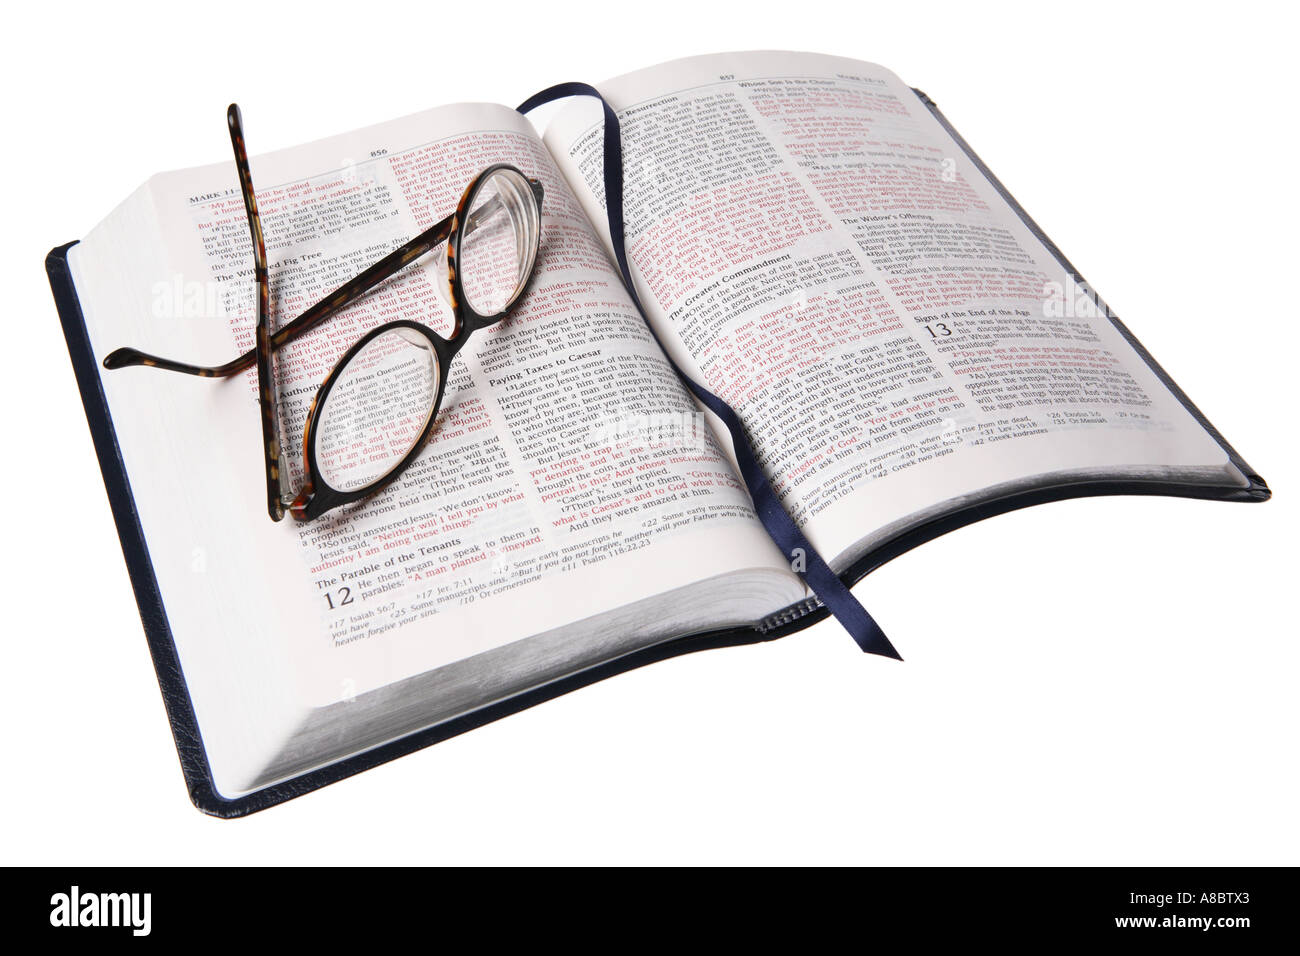 Bible and reading glasses Stock Photo